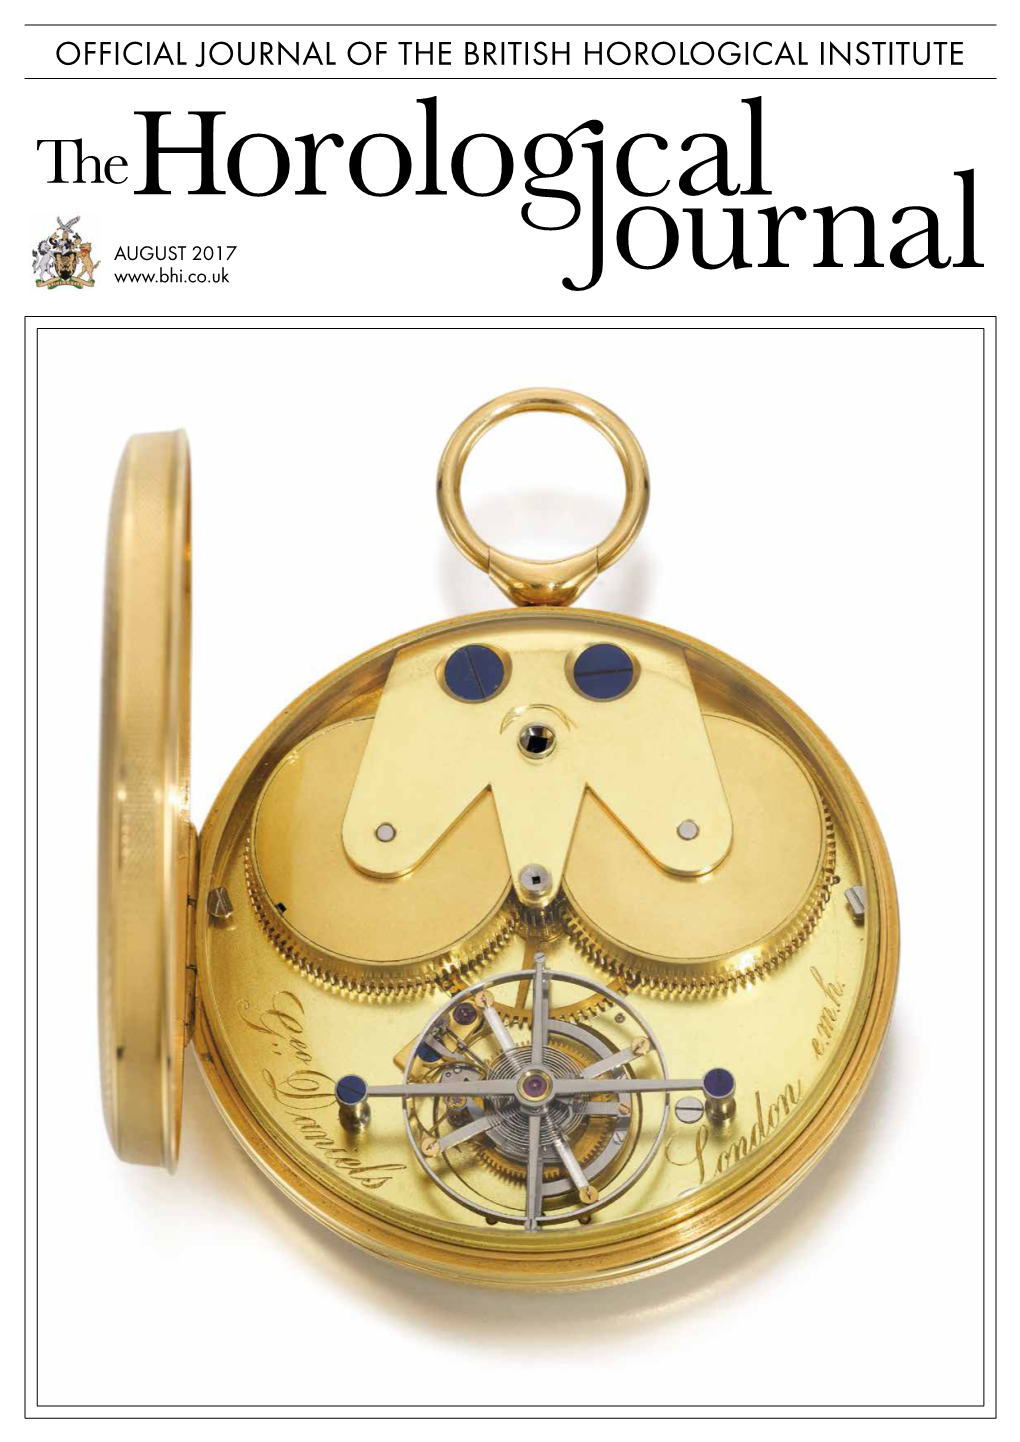 Clocks and Watches As Well As Tools, Parts, Books and Other Horological Items